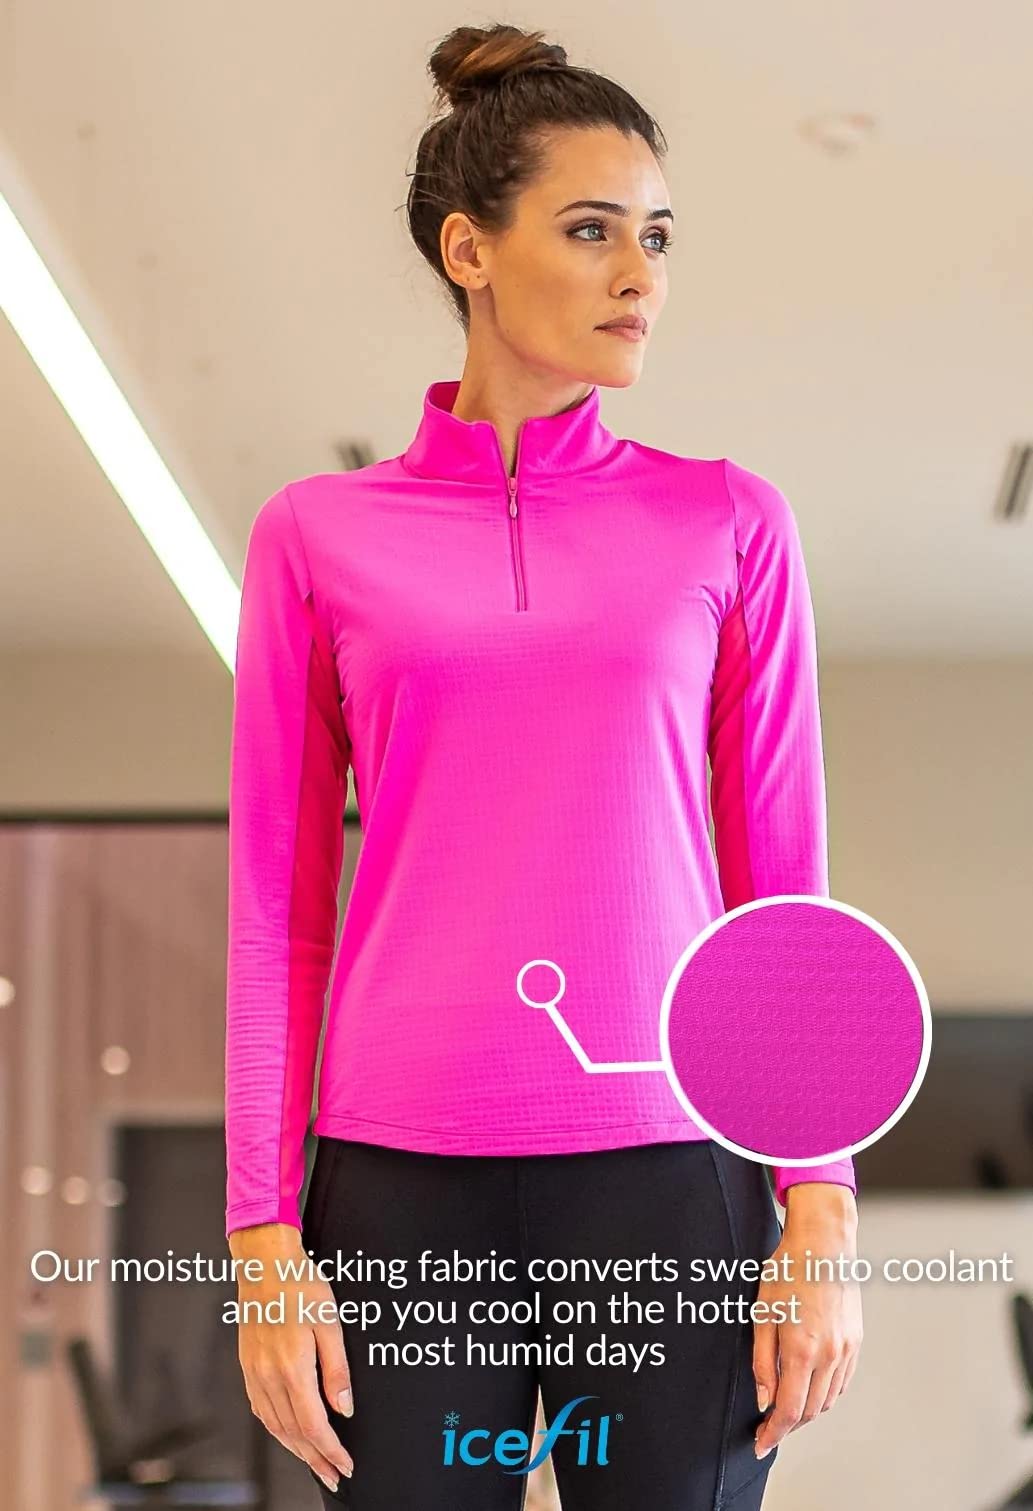 IBKUL Athleisure Wear Sun Protective UPF 50+ Icefil Cooling Tech Long Sleeve Mock Neck Top with Under Arm Mesh 80000 Watermelon Solid S